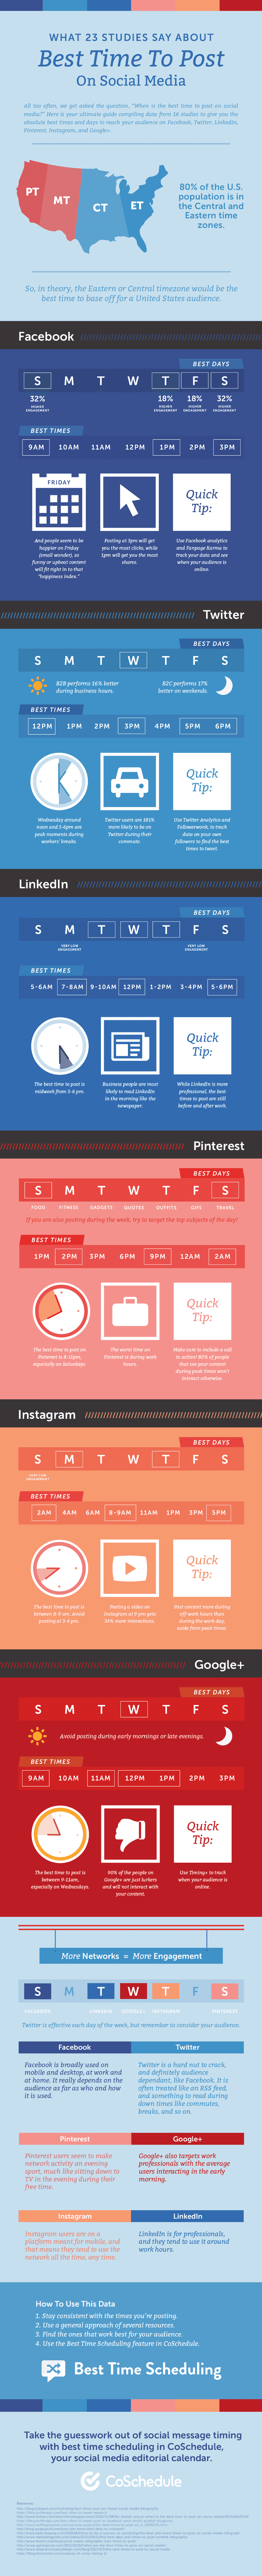 Guide of what 23 studies say are the best times to post on social media